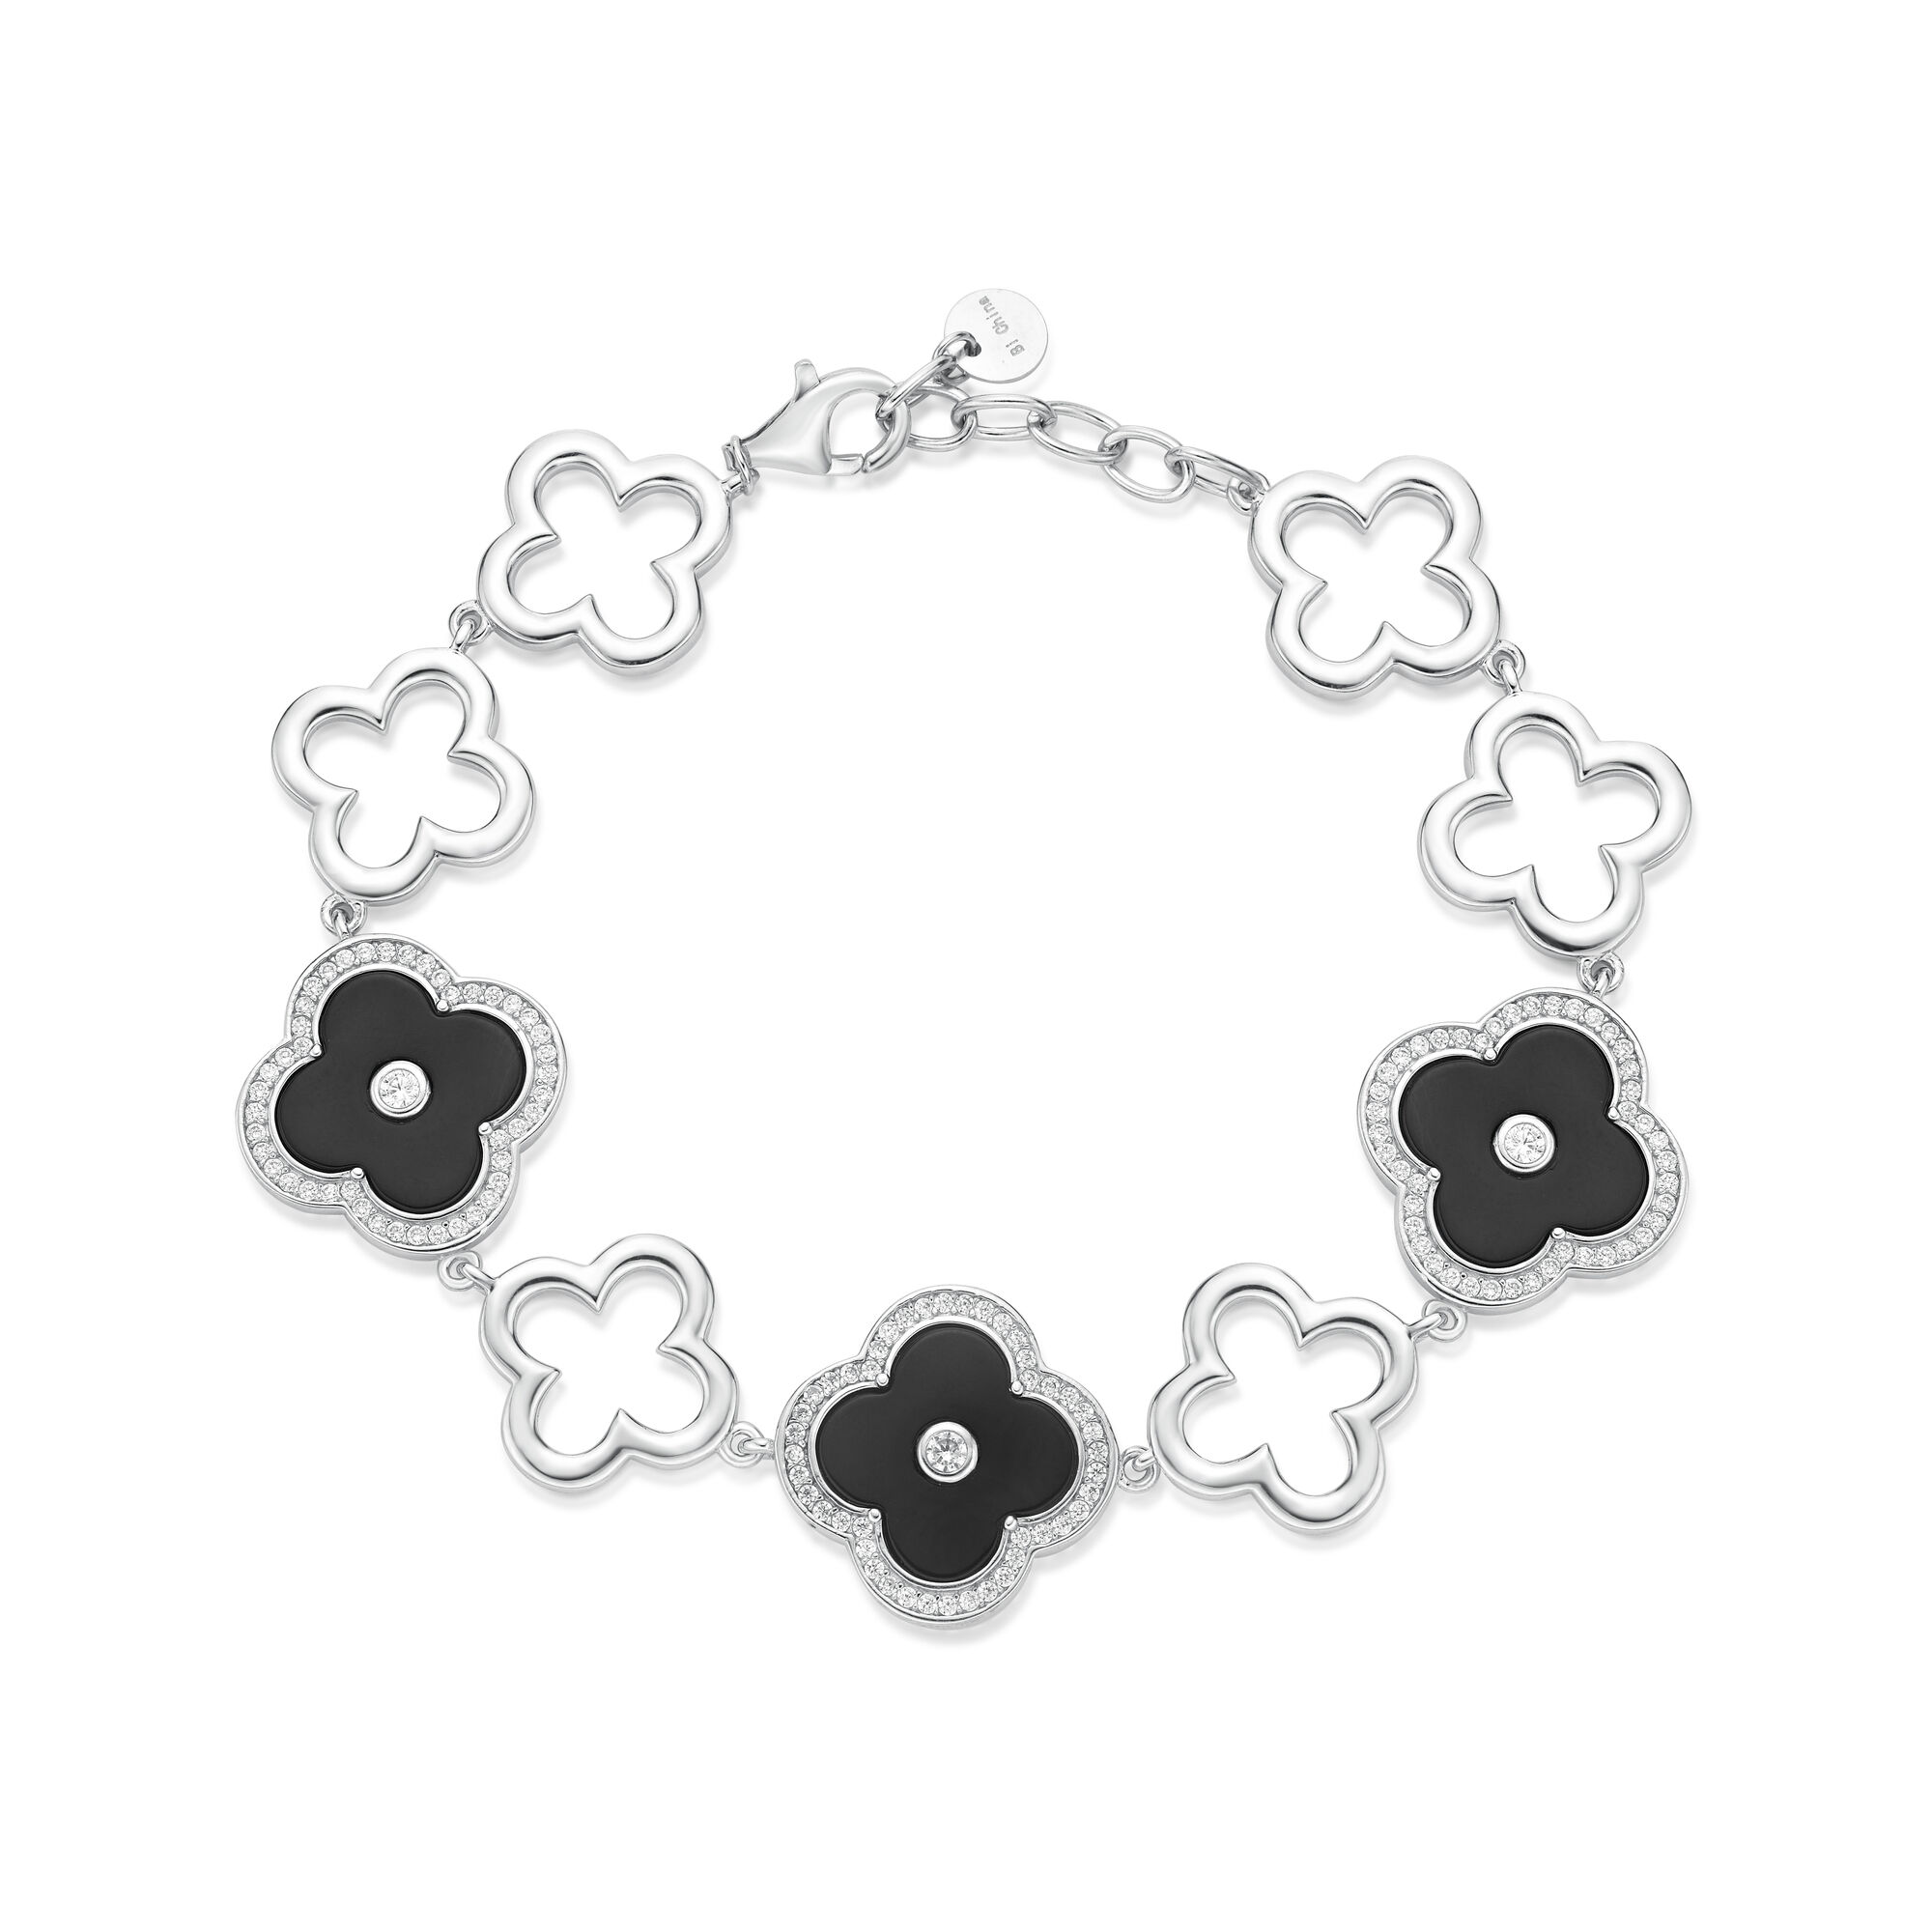 Lavari Jewelers Women's Black Onyx Flower Silver Layered Bracelet with Lobster Clasp, 925 Sterling Silver, Cubic Zirconia, 7-8 Inches